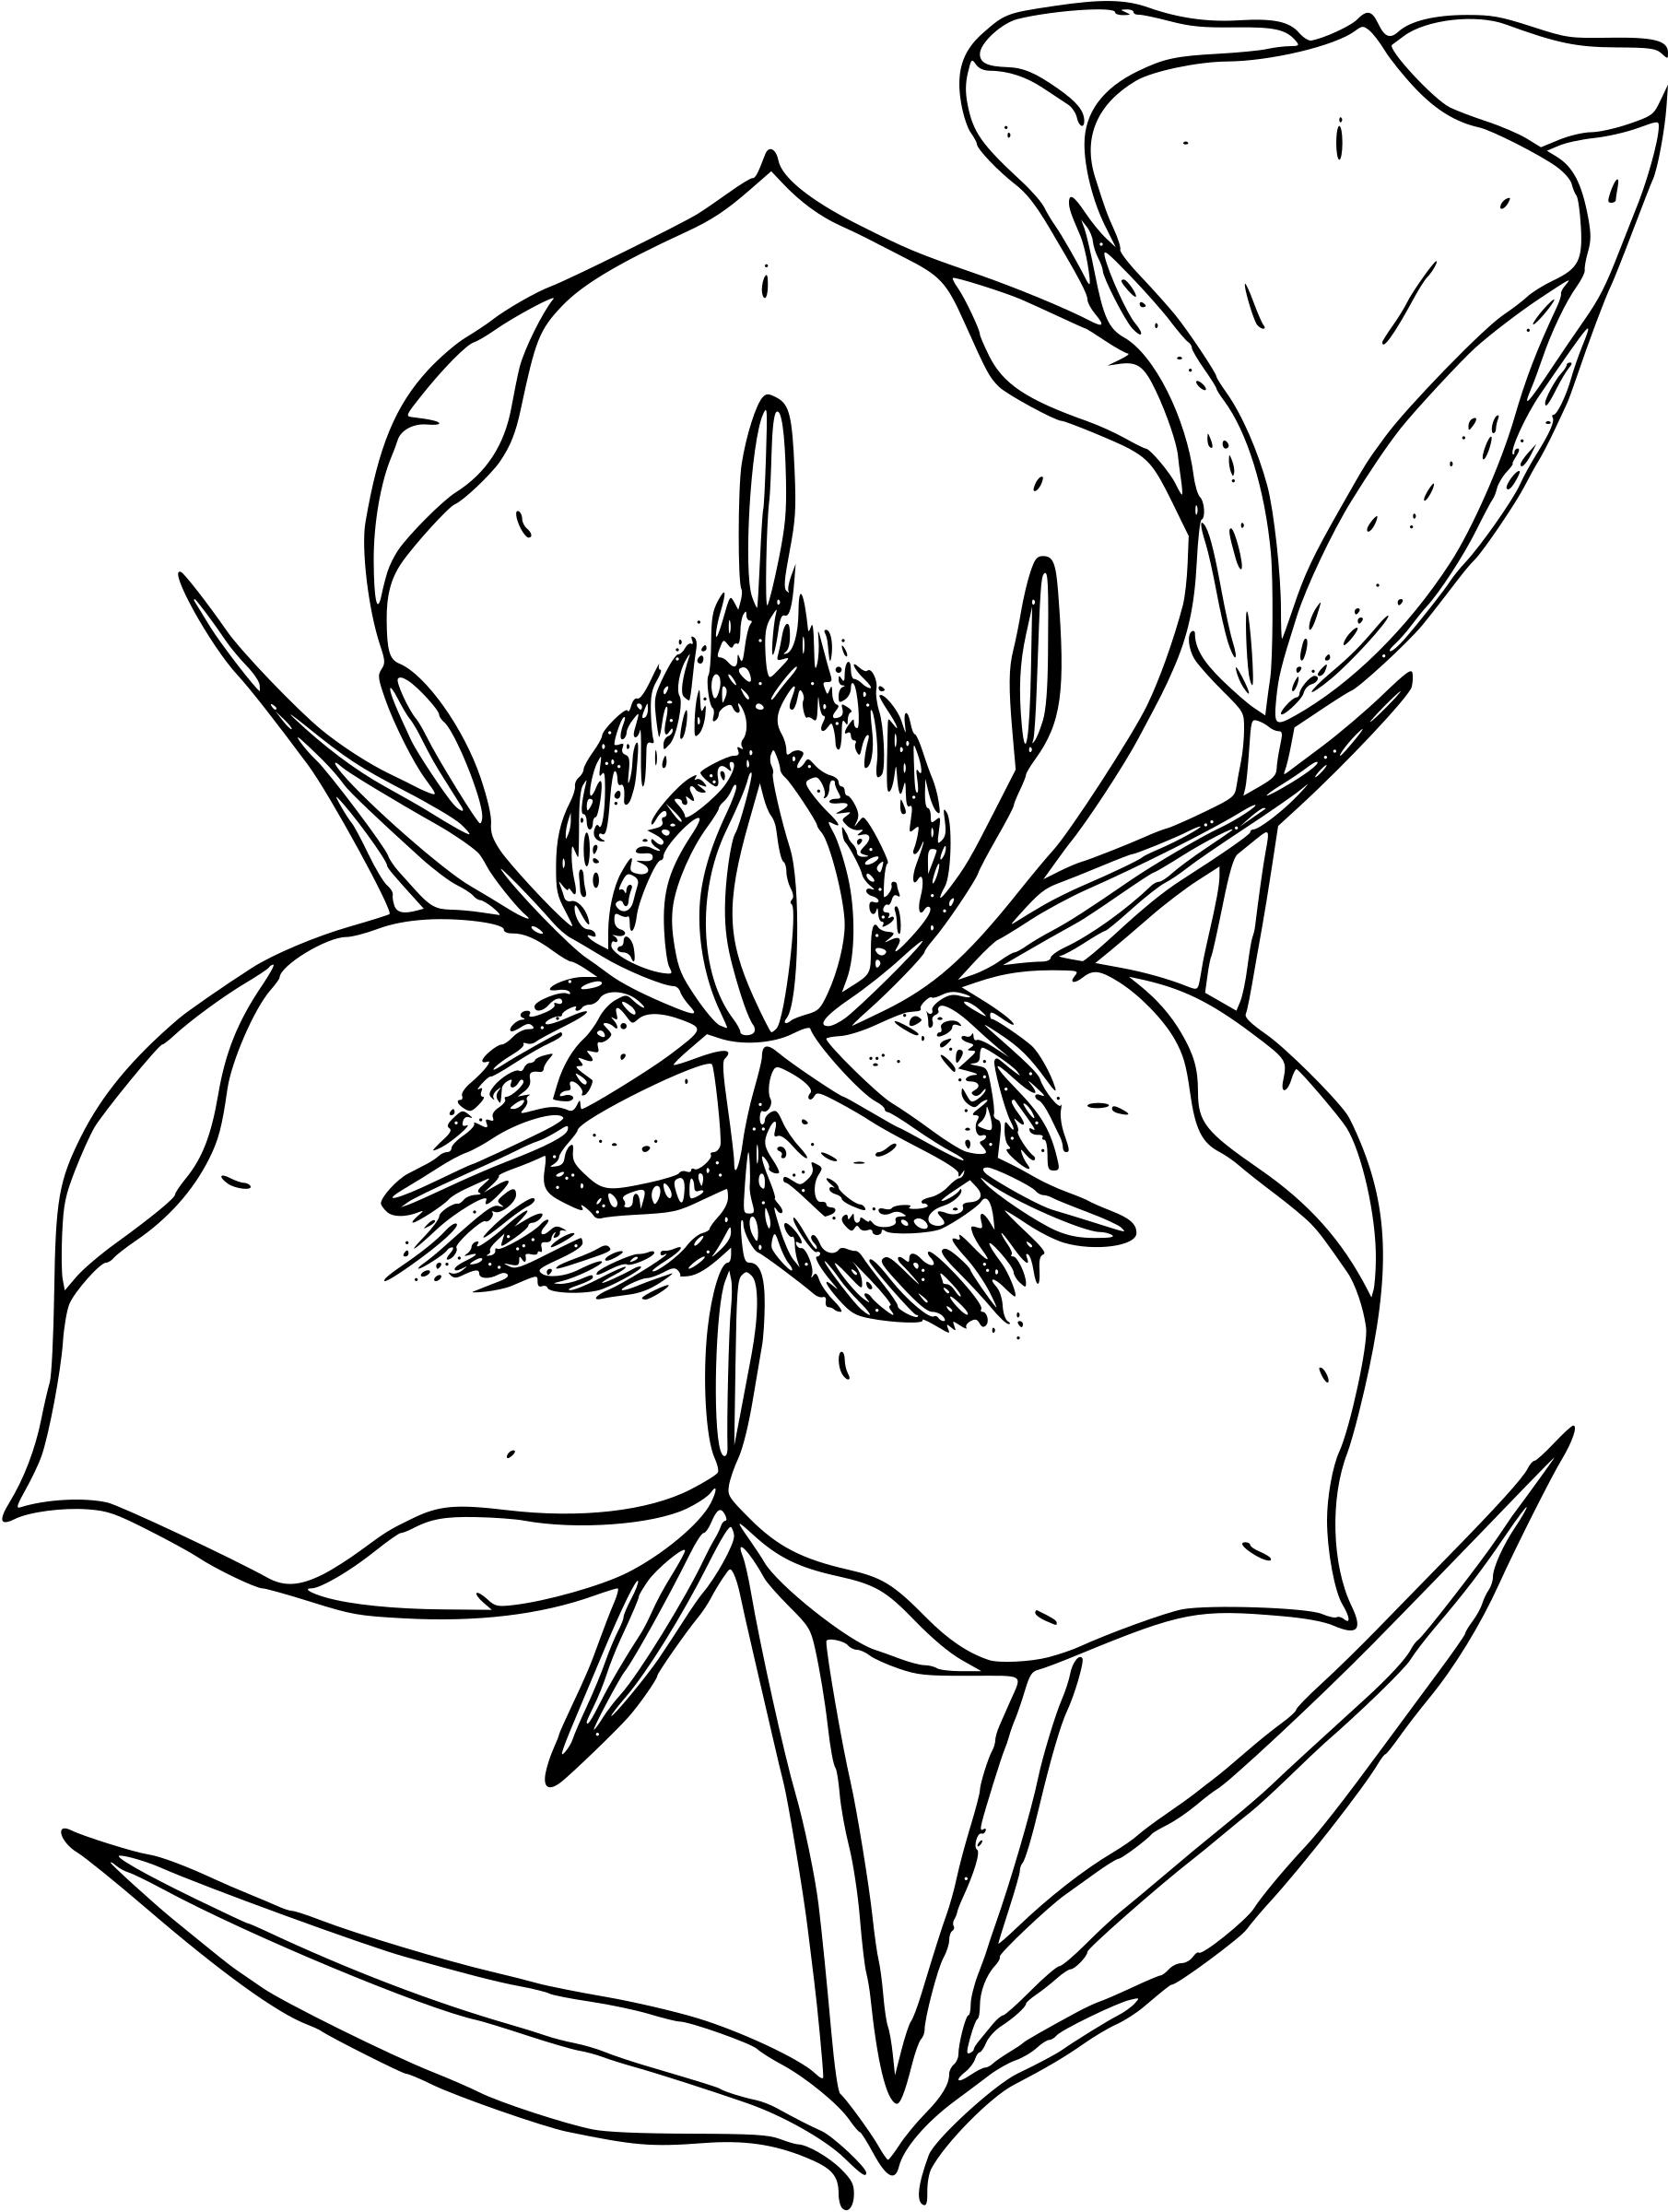 Sego lily png